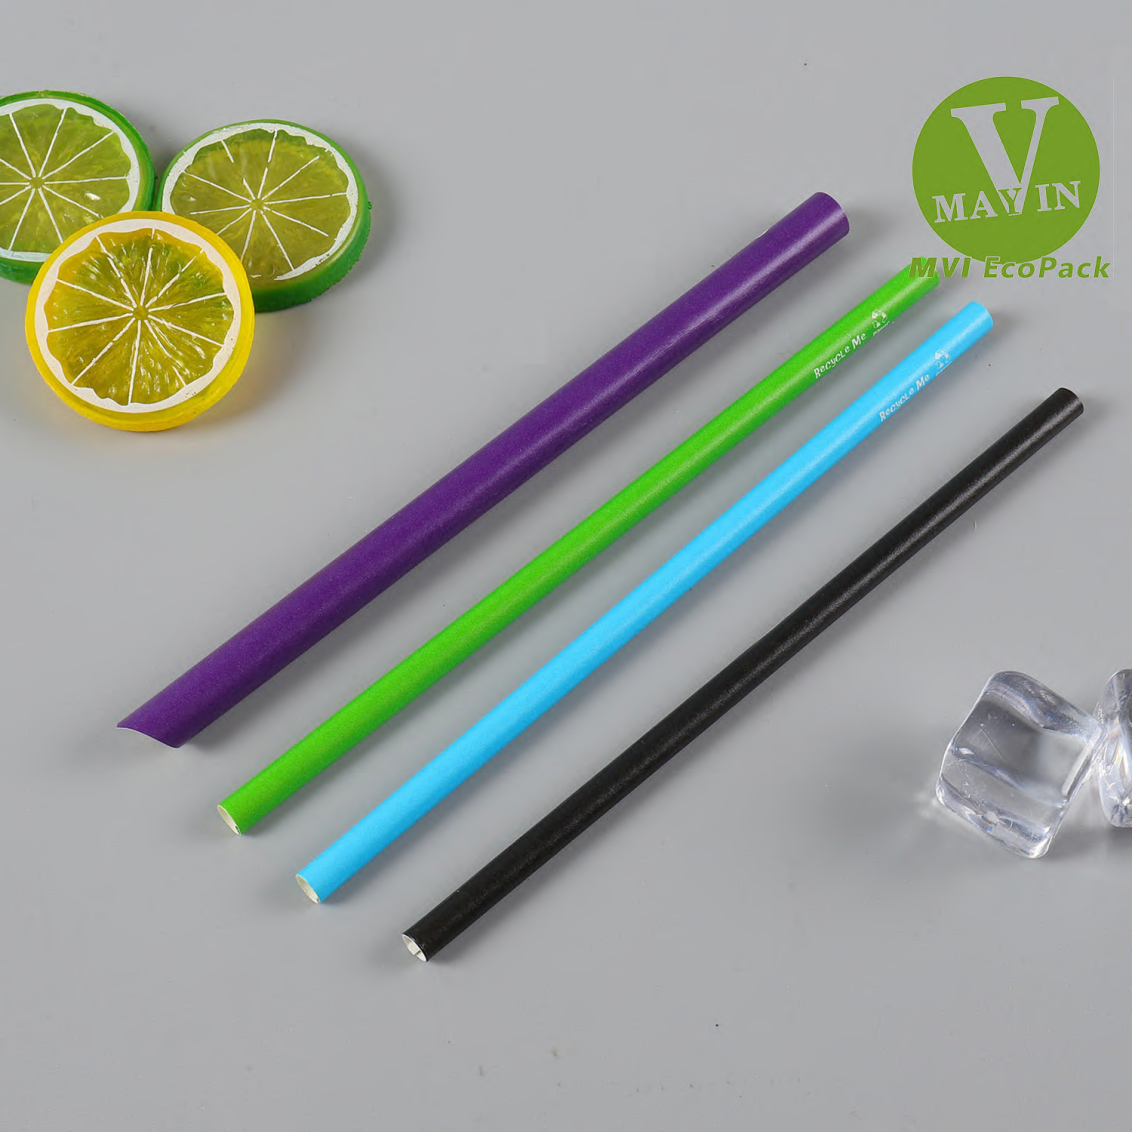 What are the advantages of Single-seam WBBC paper straws than traditional paper straws?